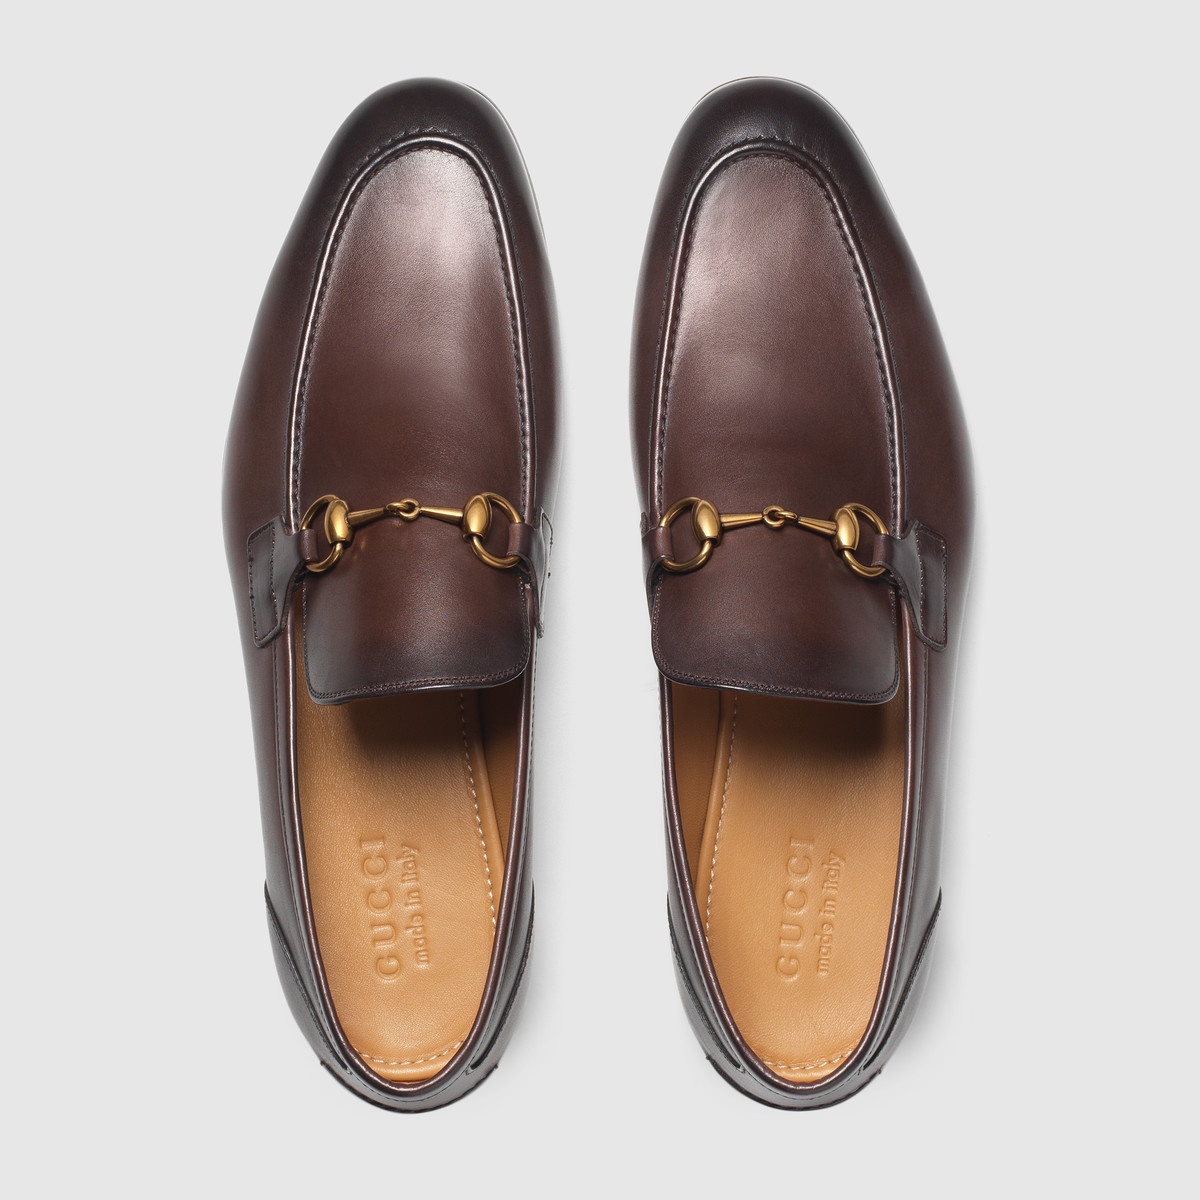 Gucci Jordaan leather loafer - 3